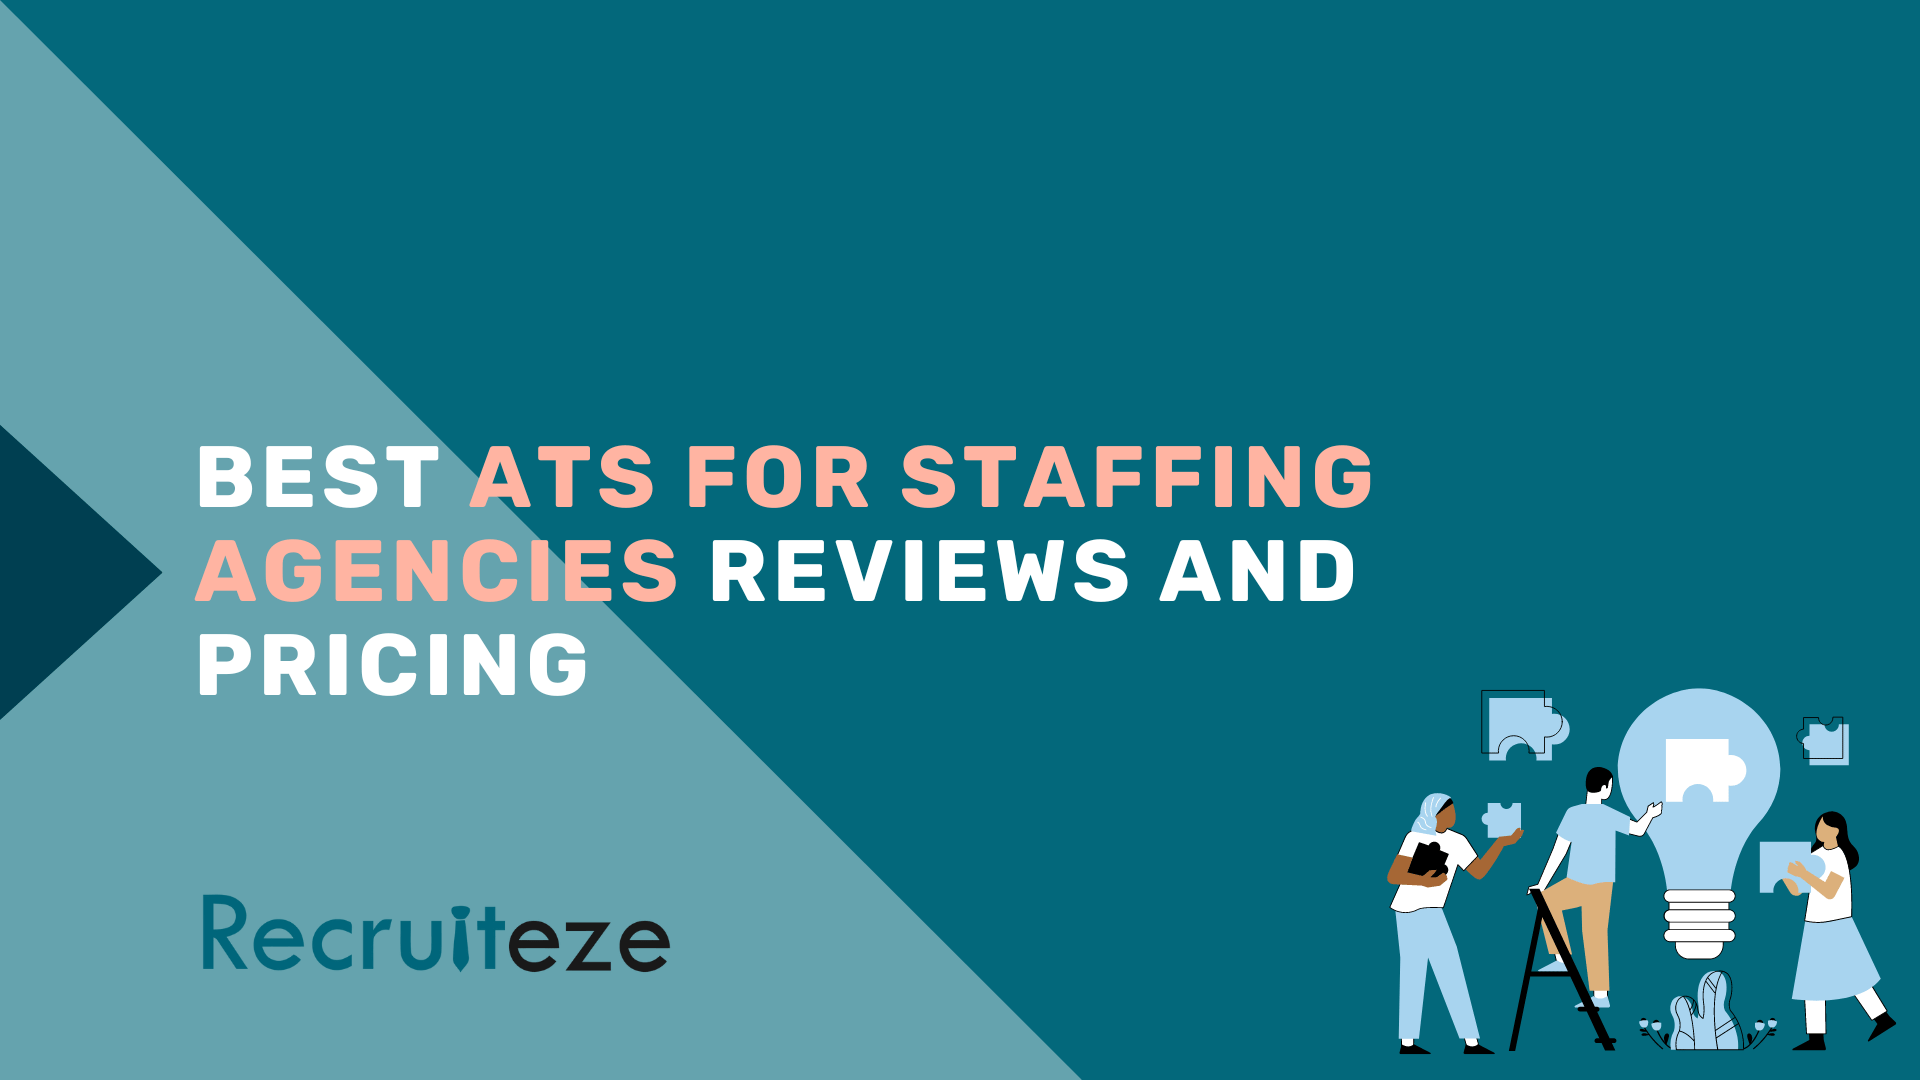 5 Best ATS For Staffing Agencies - 2023 Reviews and Pricing